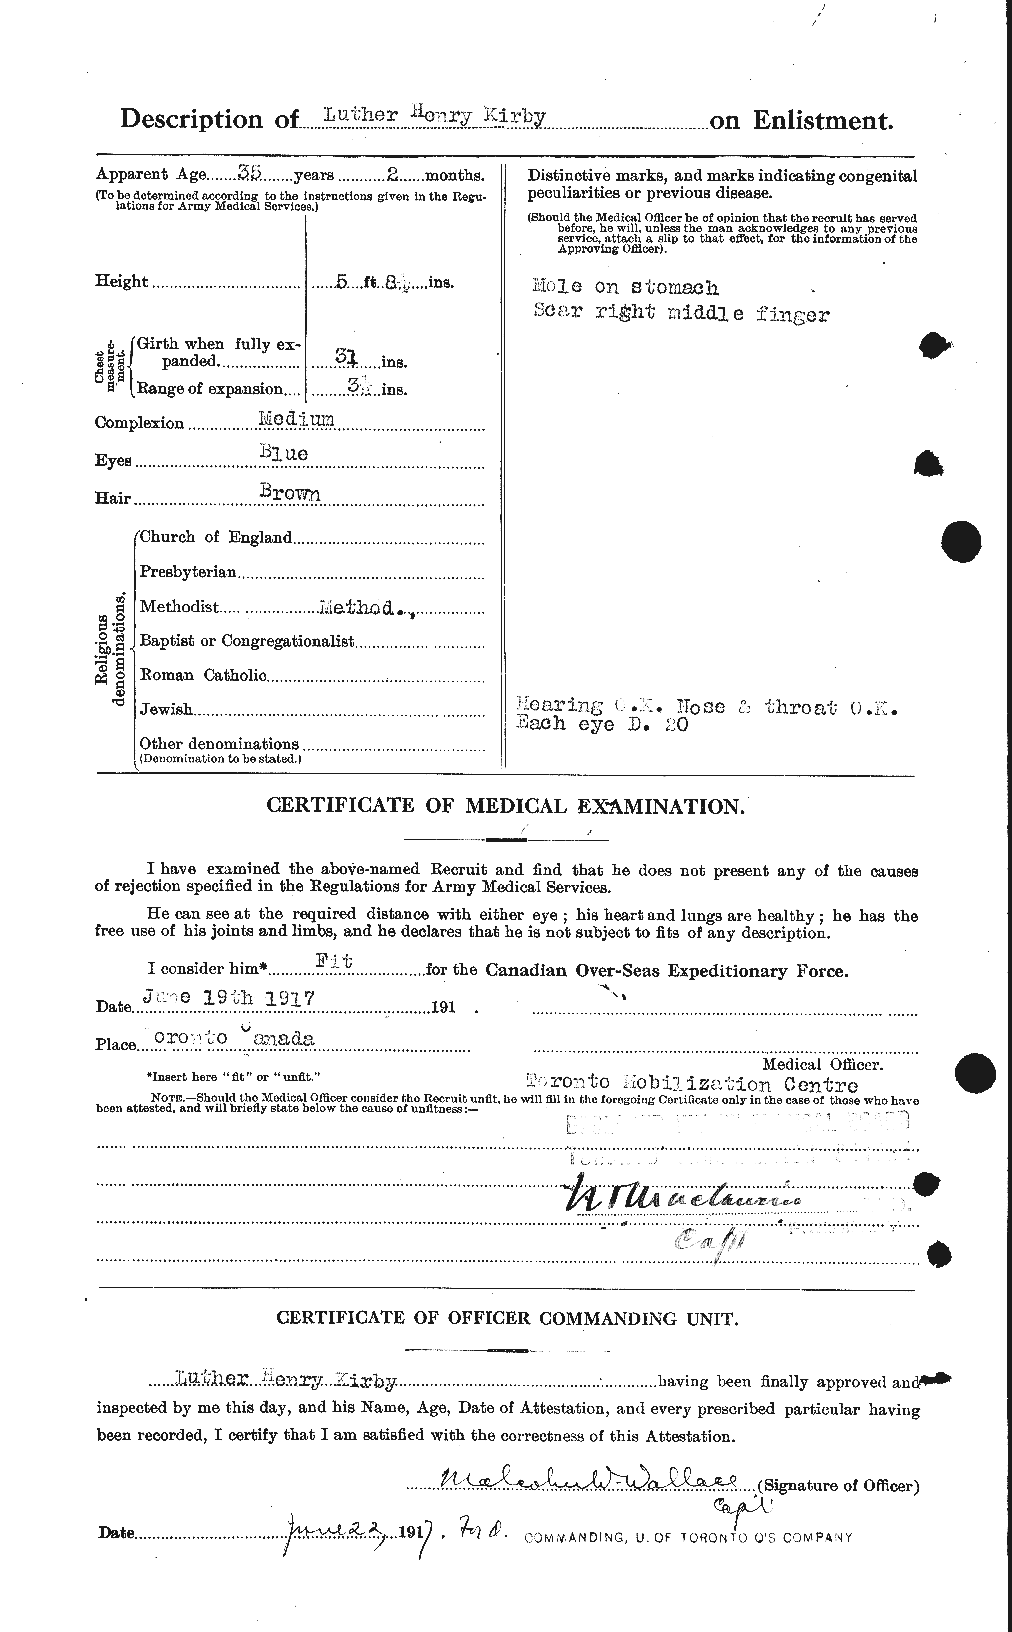 Personnel Records of the First World War - CEF 437252b